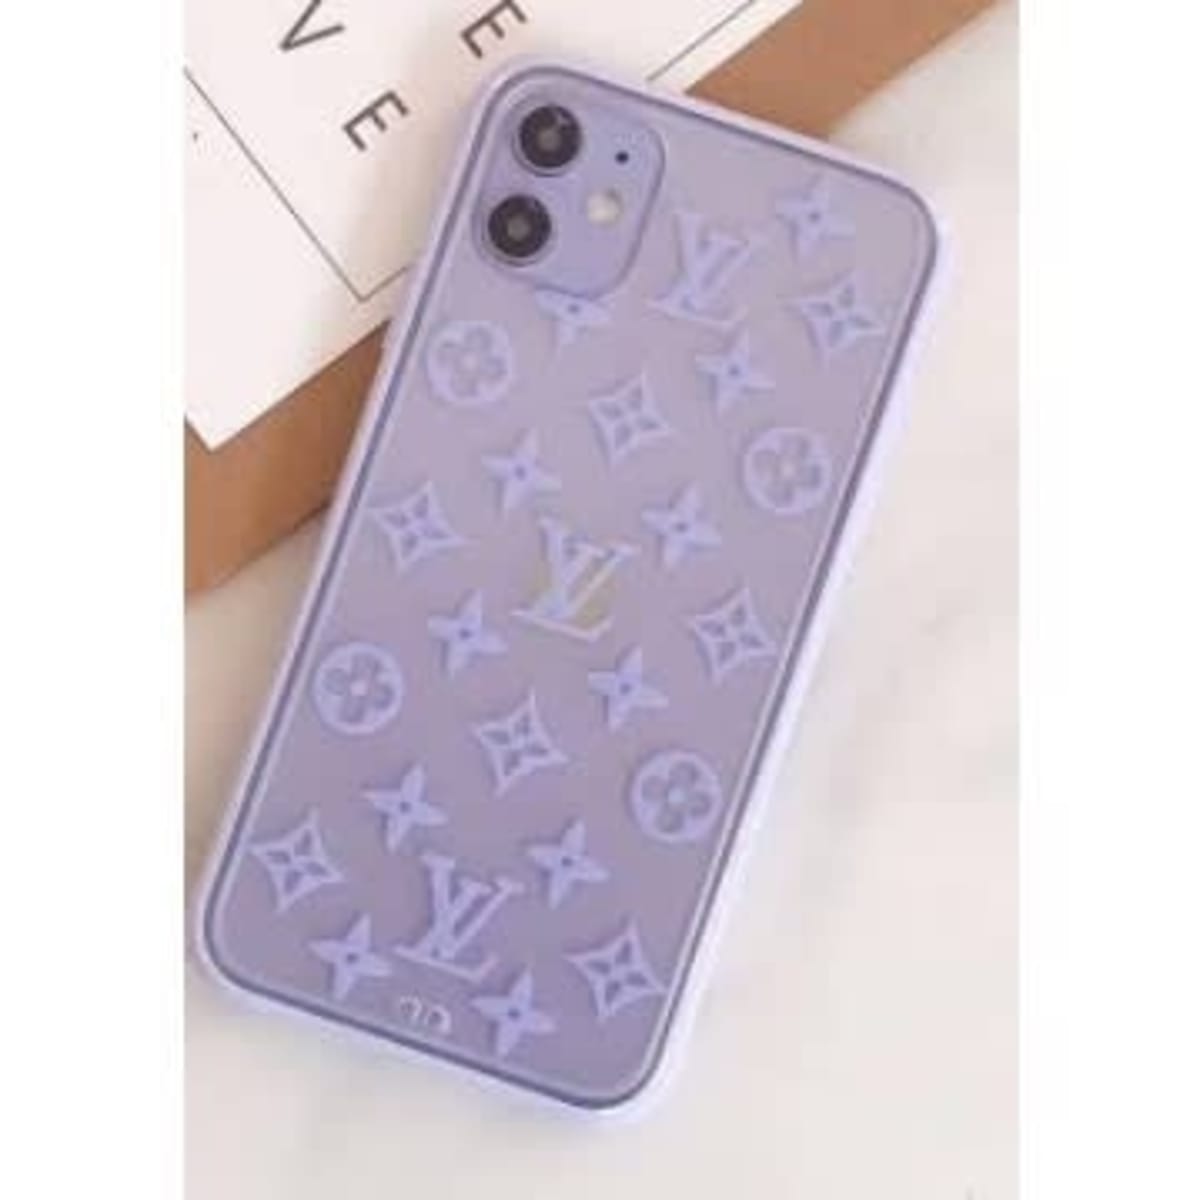 Louis Vuitton Cell Phone Back Cases